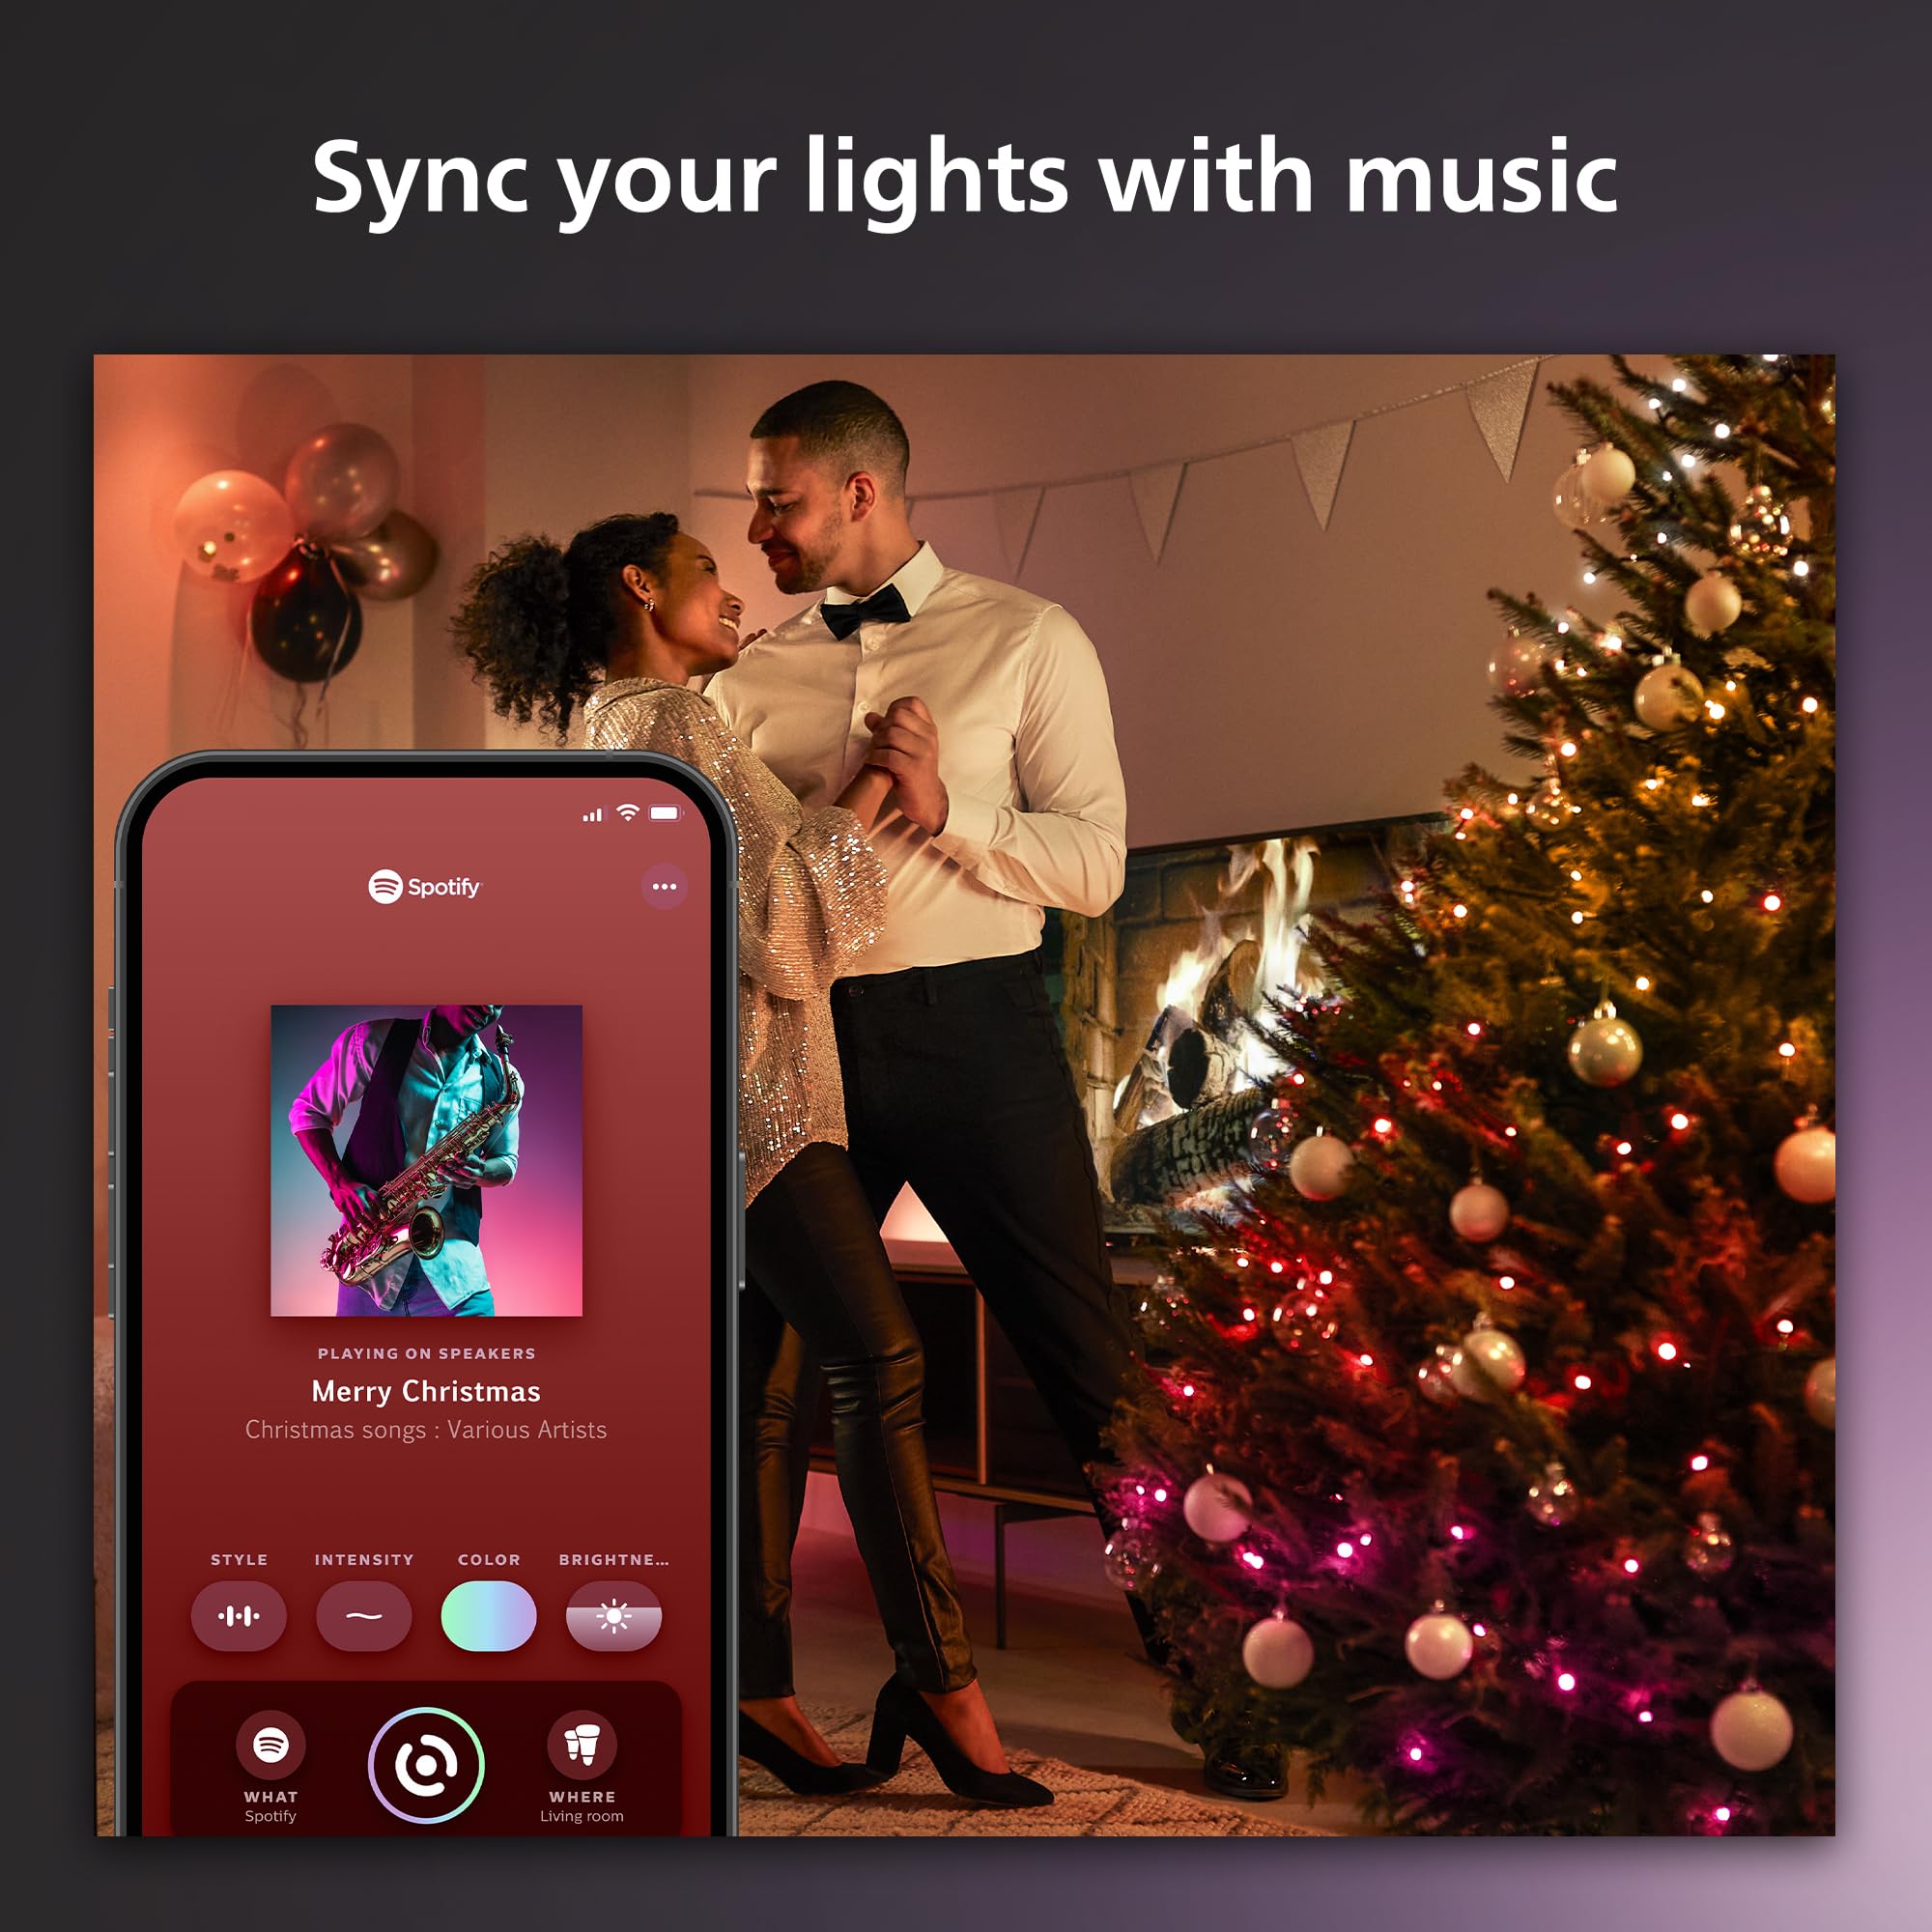 Philips Hue Christmas Festavia 130 Foot String Lights - 500 Mini White and Color Changing Smart LEDs - Waterproof - Year Round Indoor/Outdoor Decoration - Sync with Music - Works with Voice, Matter